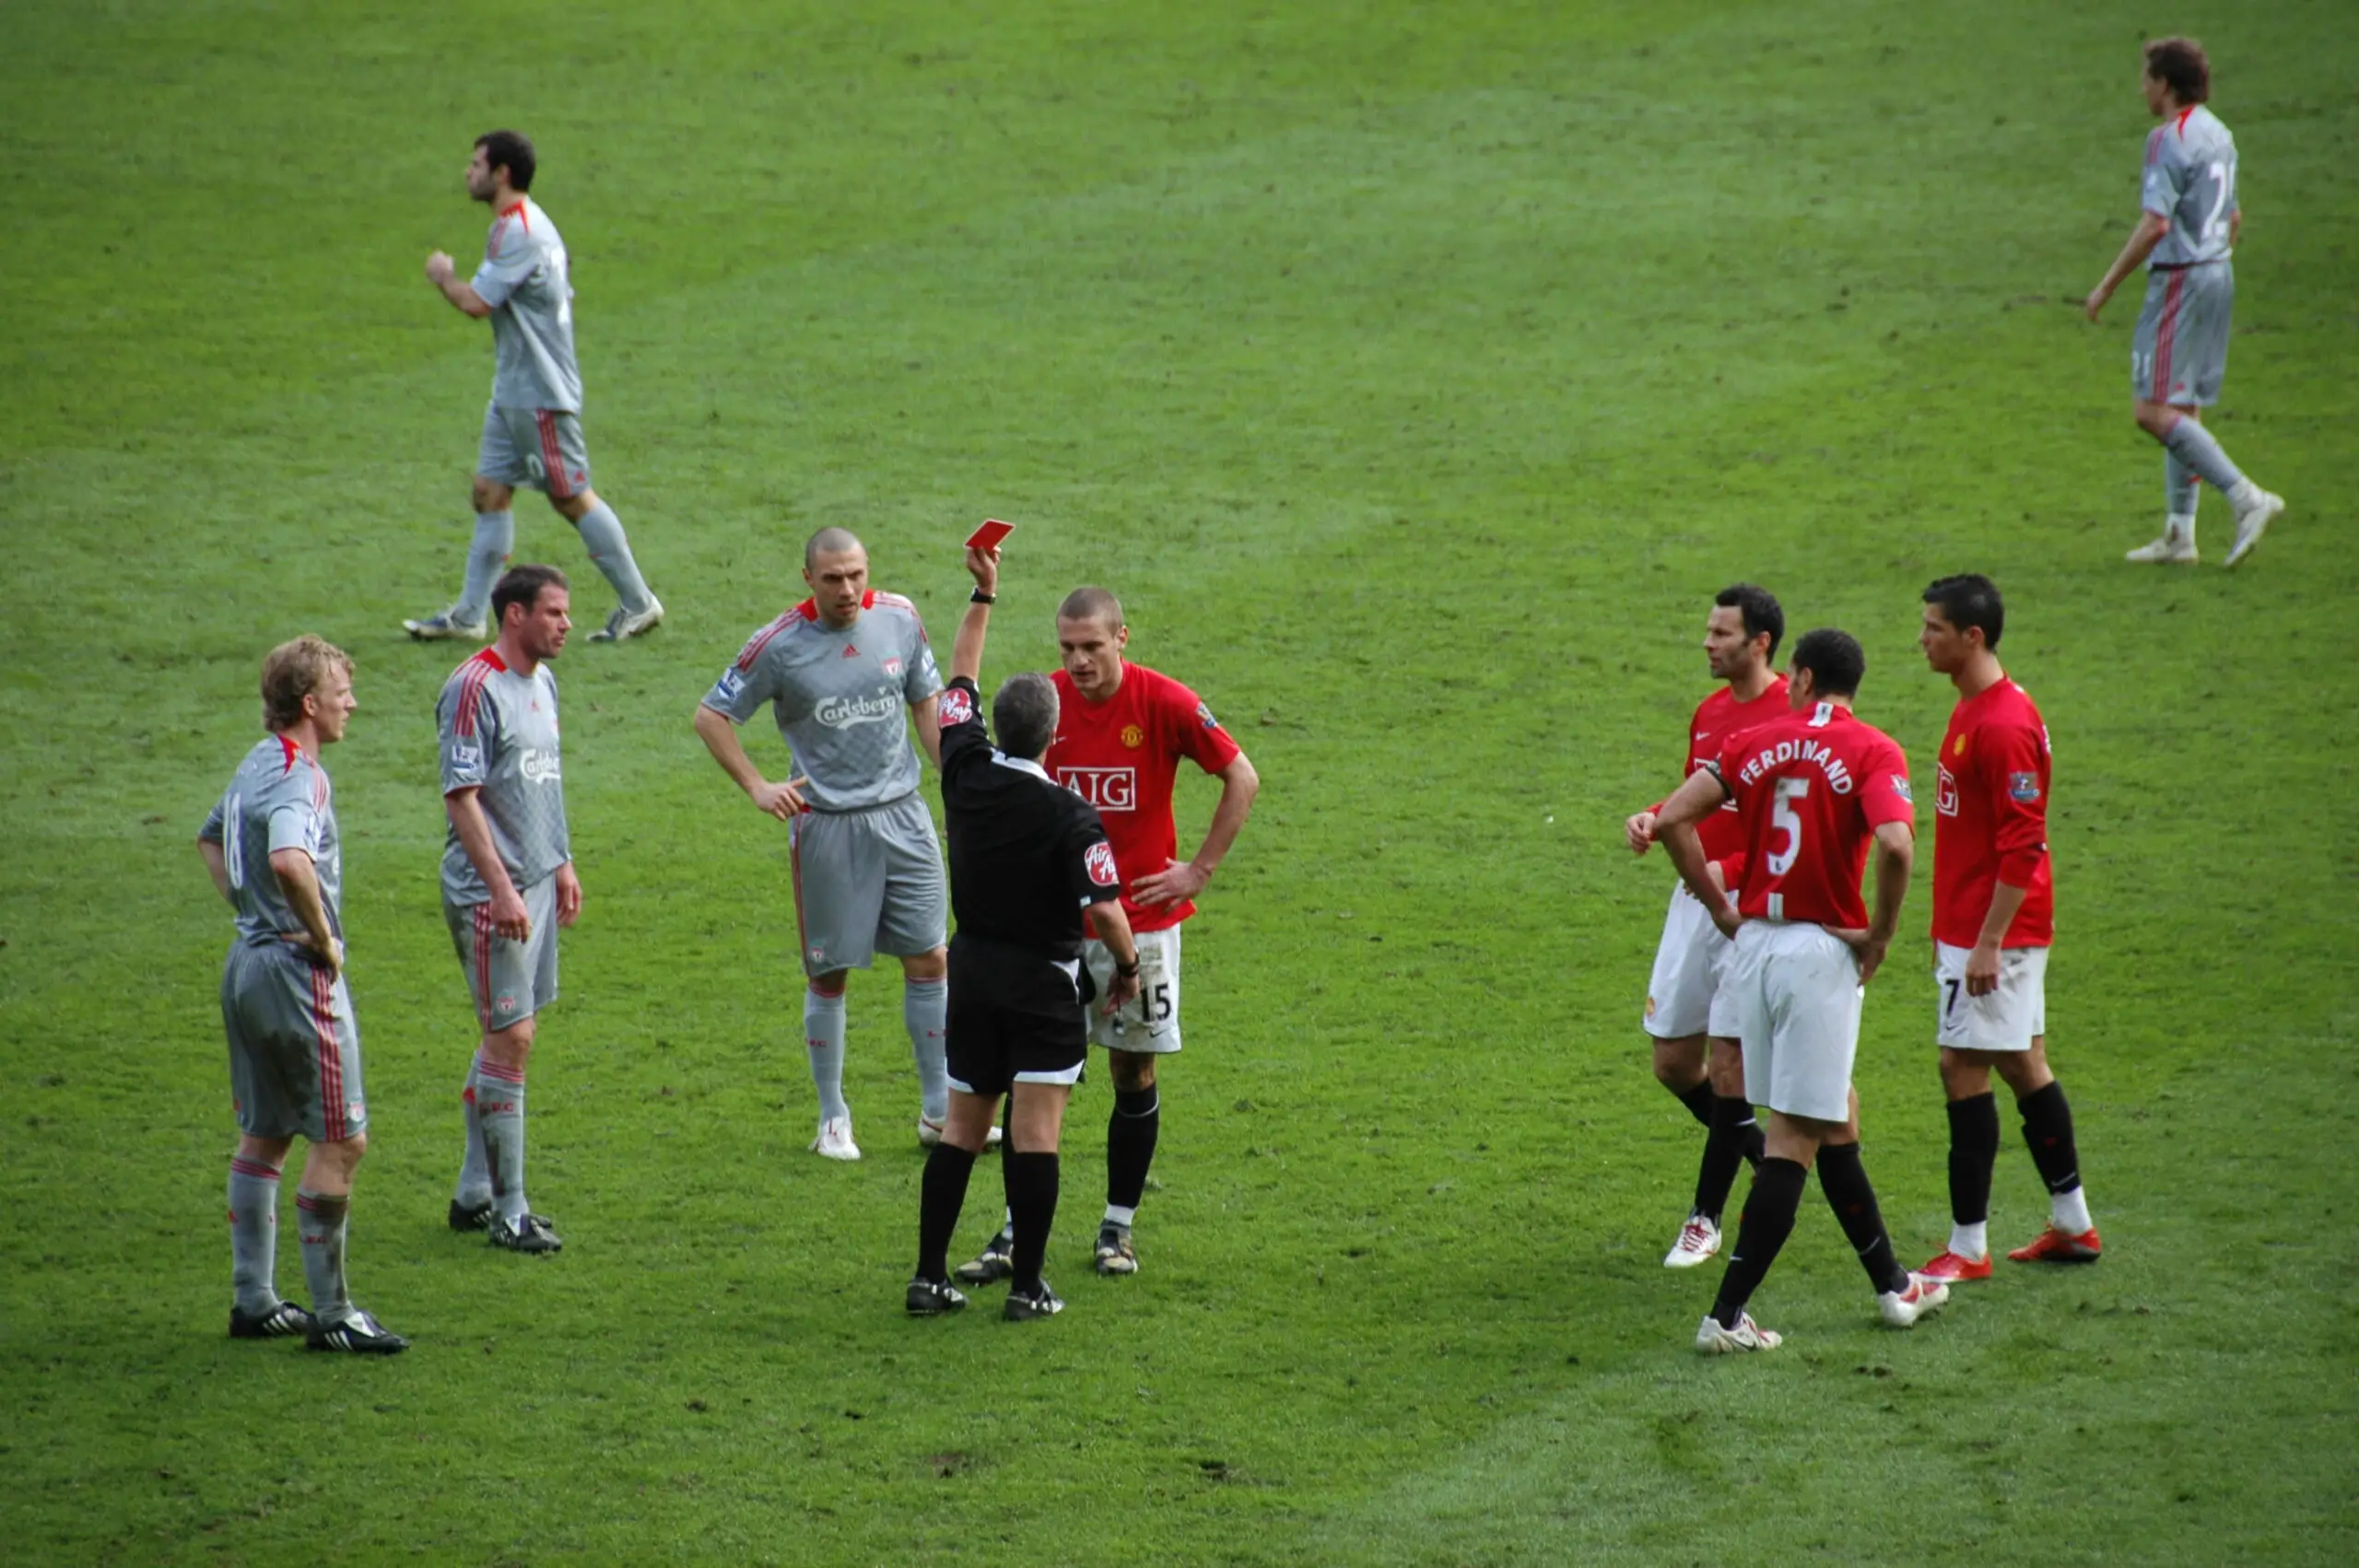 Vidic given red card after being last man standing